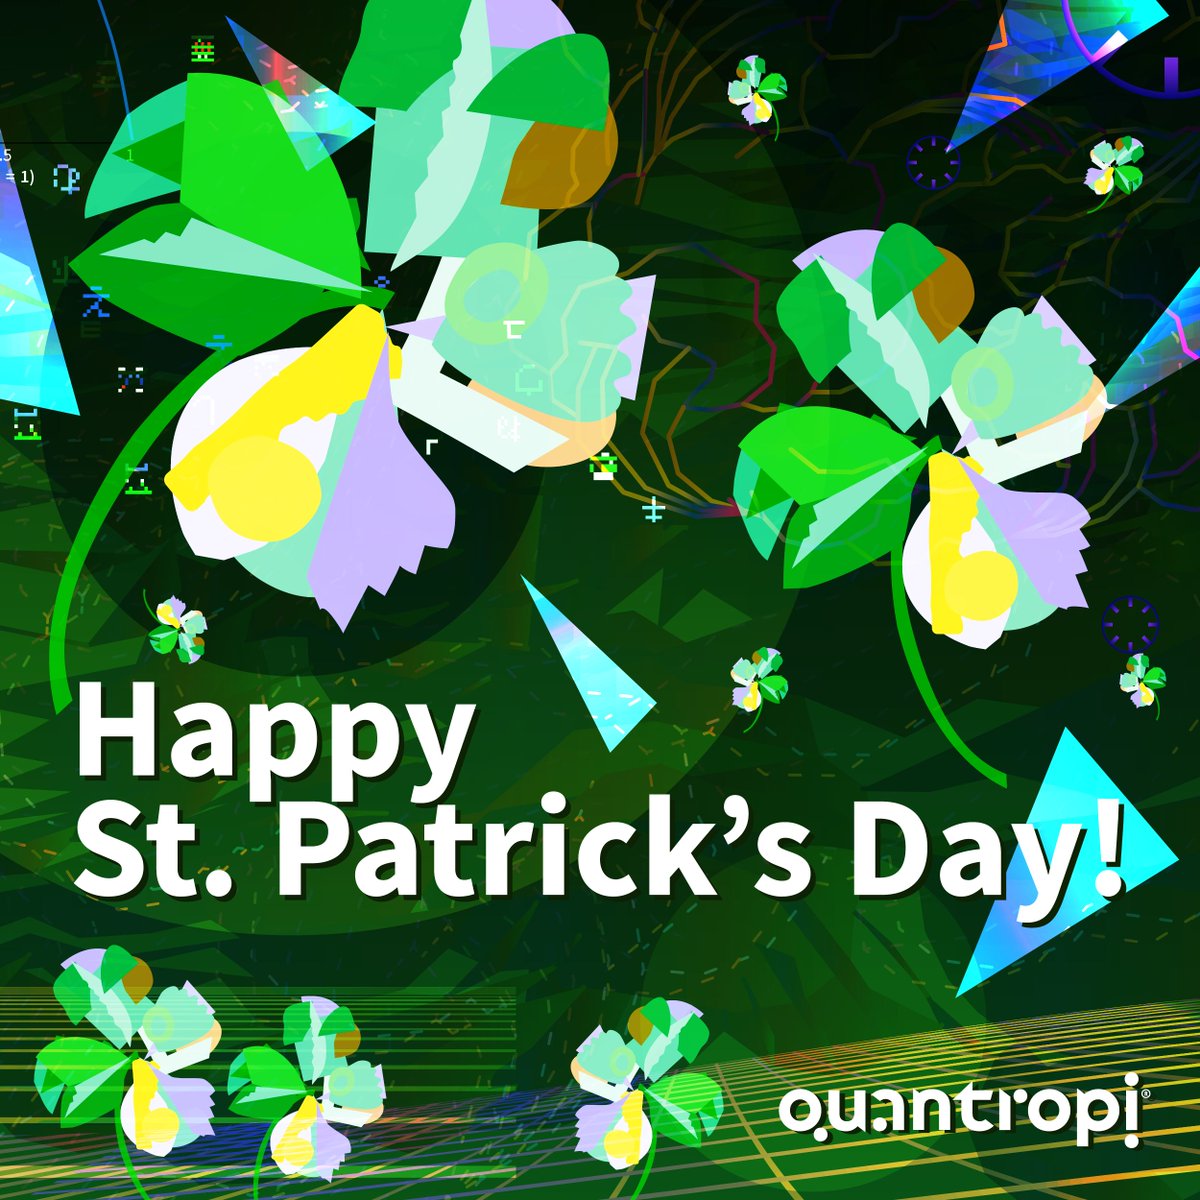 Happy St. Patrick's Day! 🍀 Wishing everyone safety, security, and all the luck of the Irish! #Quantropi #StPatricksDay #LuckOfTheIrish #BringItOn